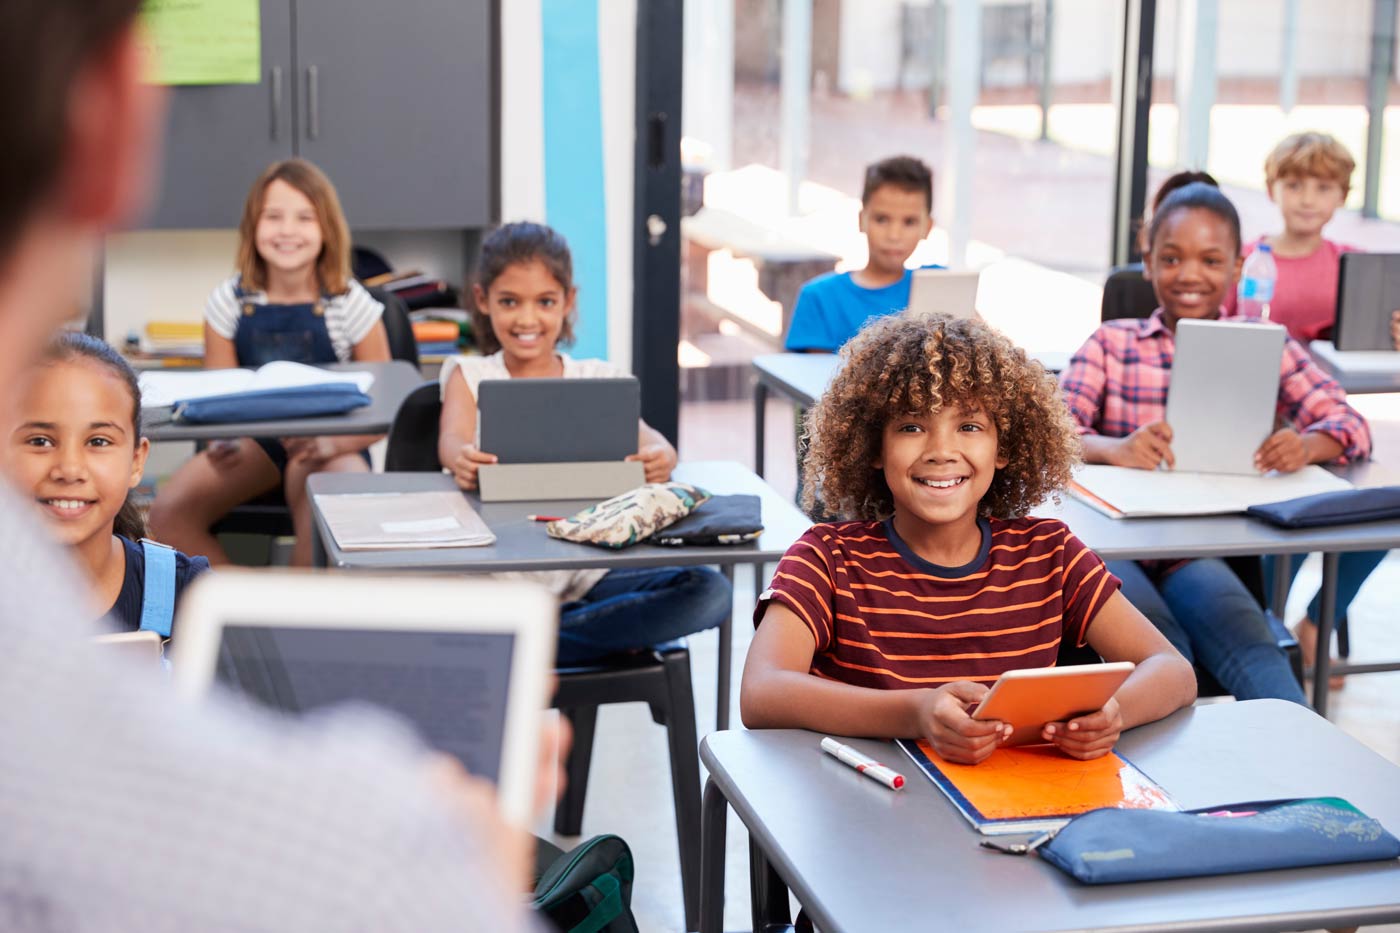 5 ways that technology is changing education